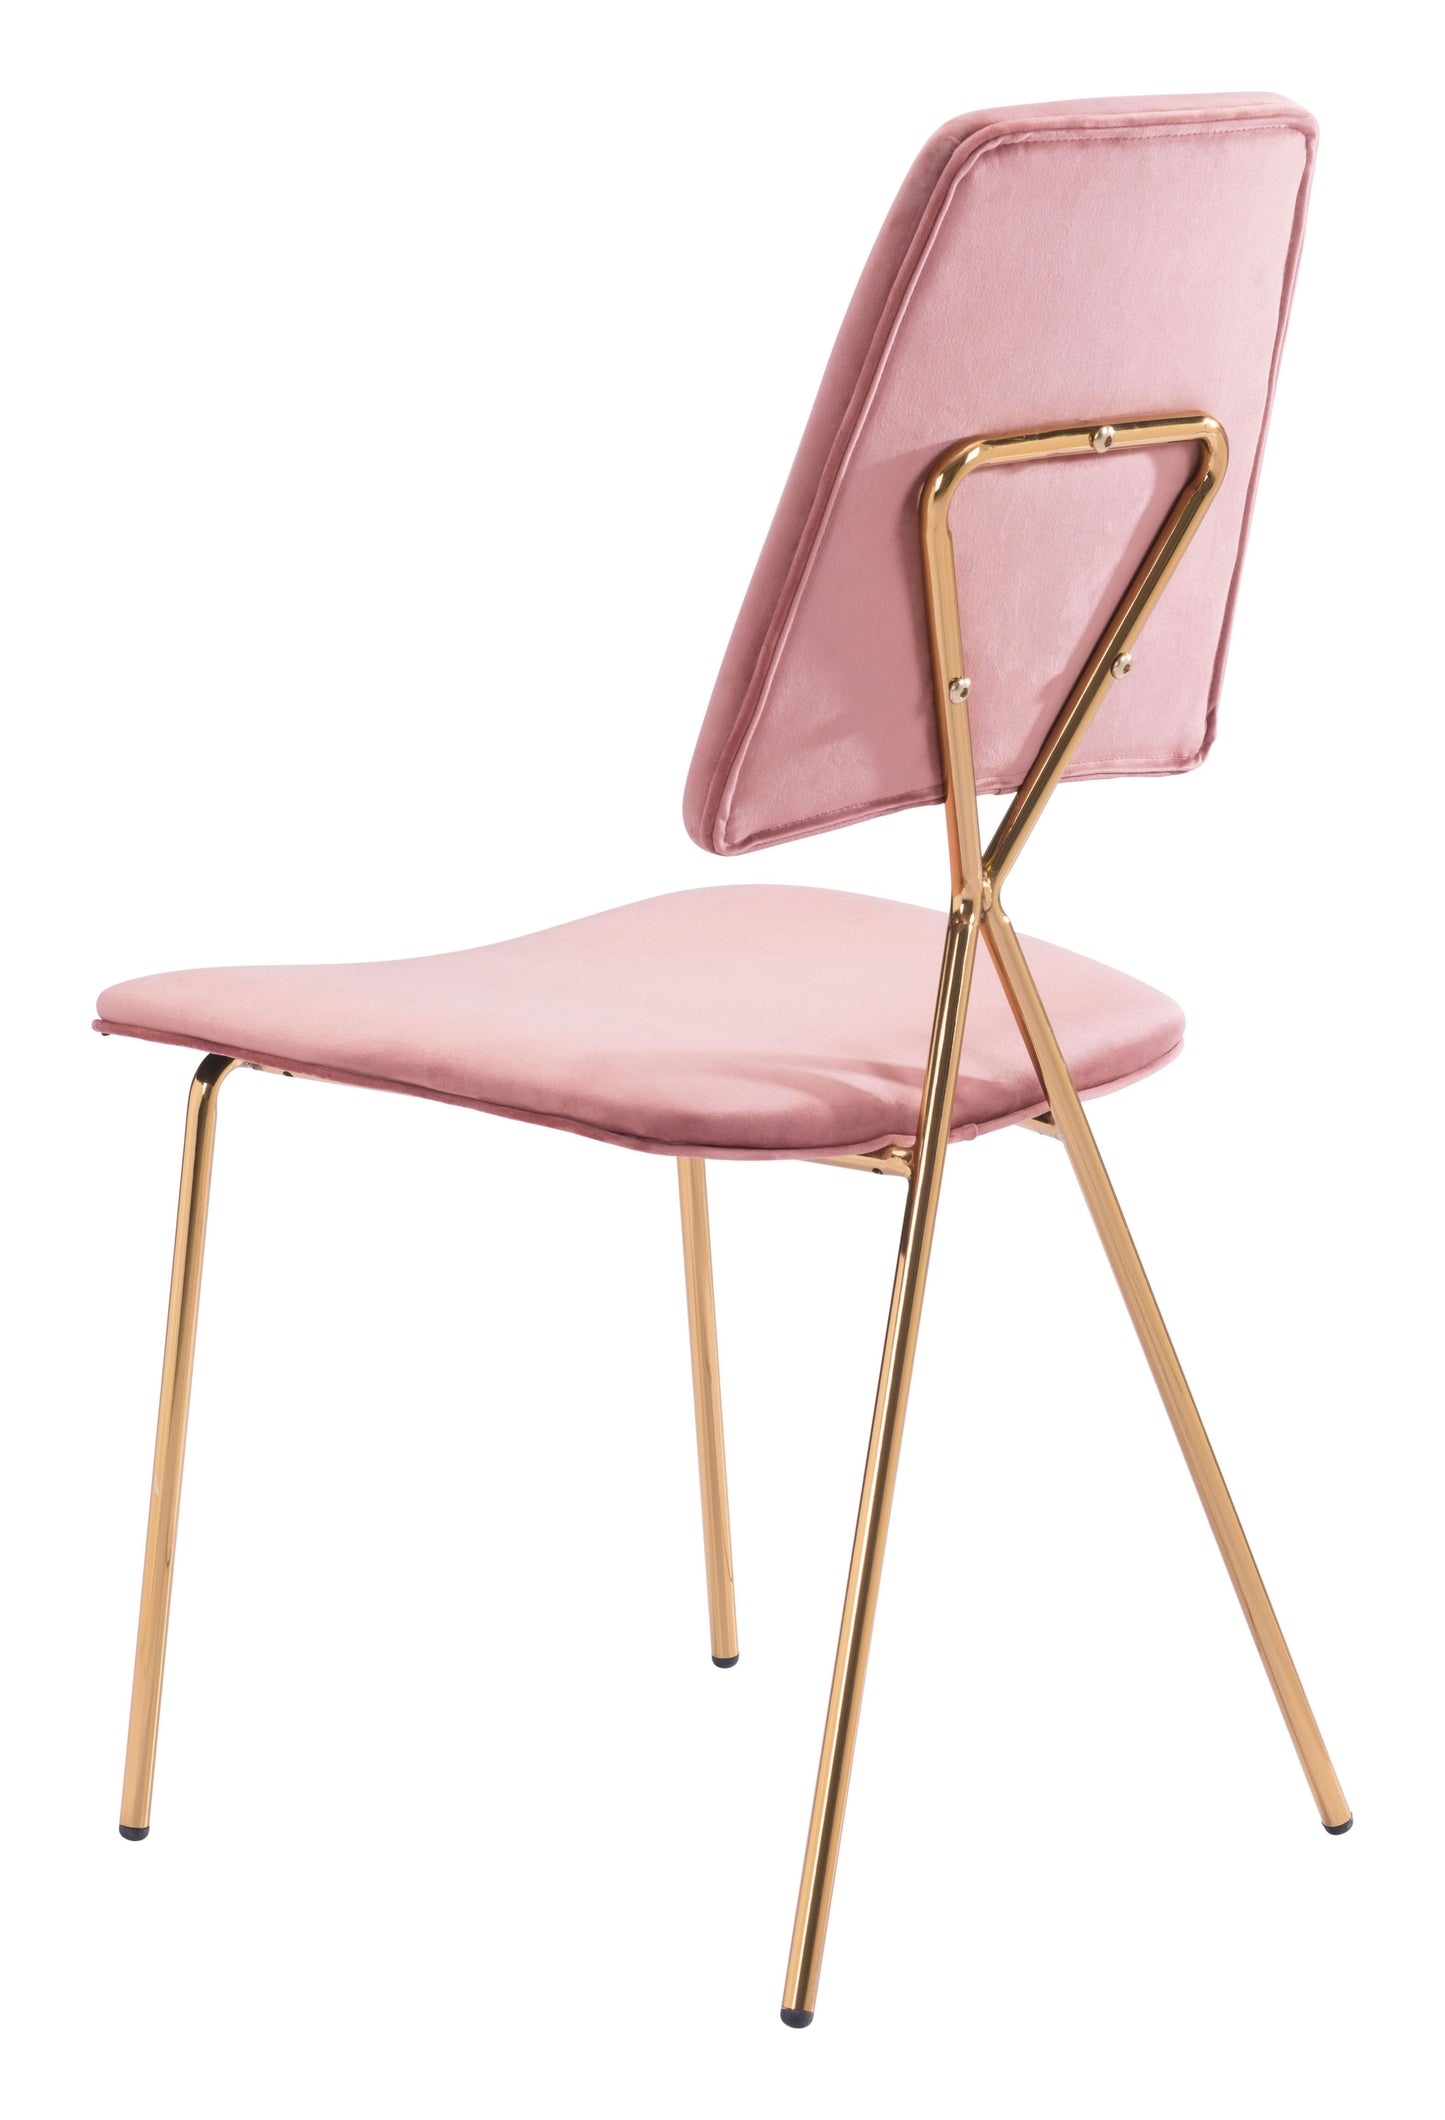 Chloe Dining Chair Pink & Gold